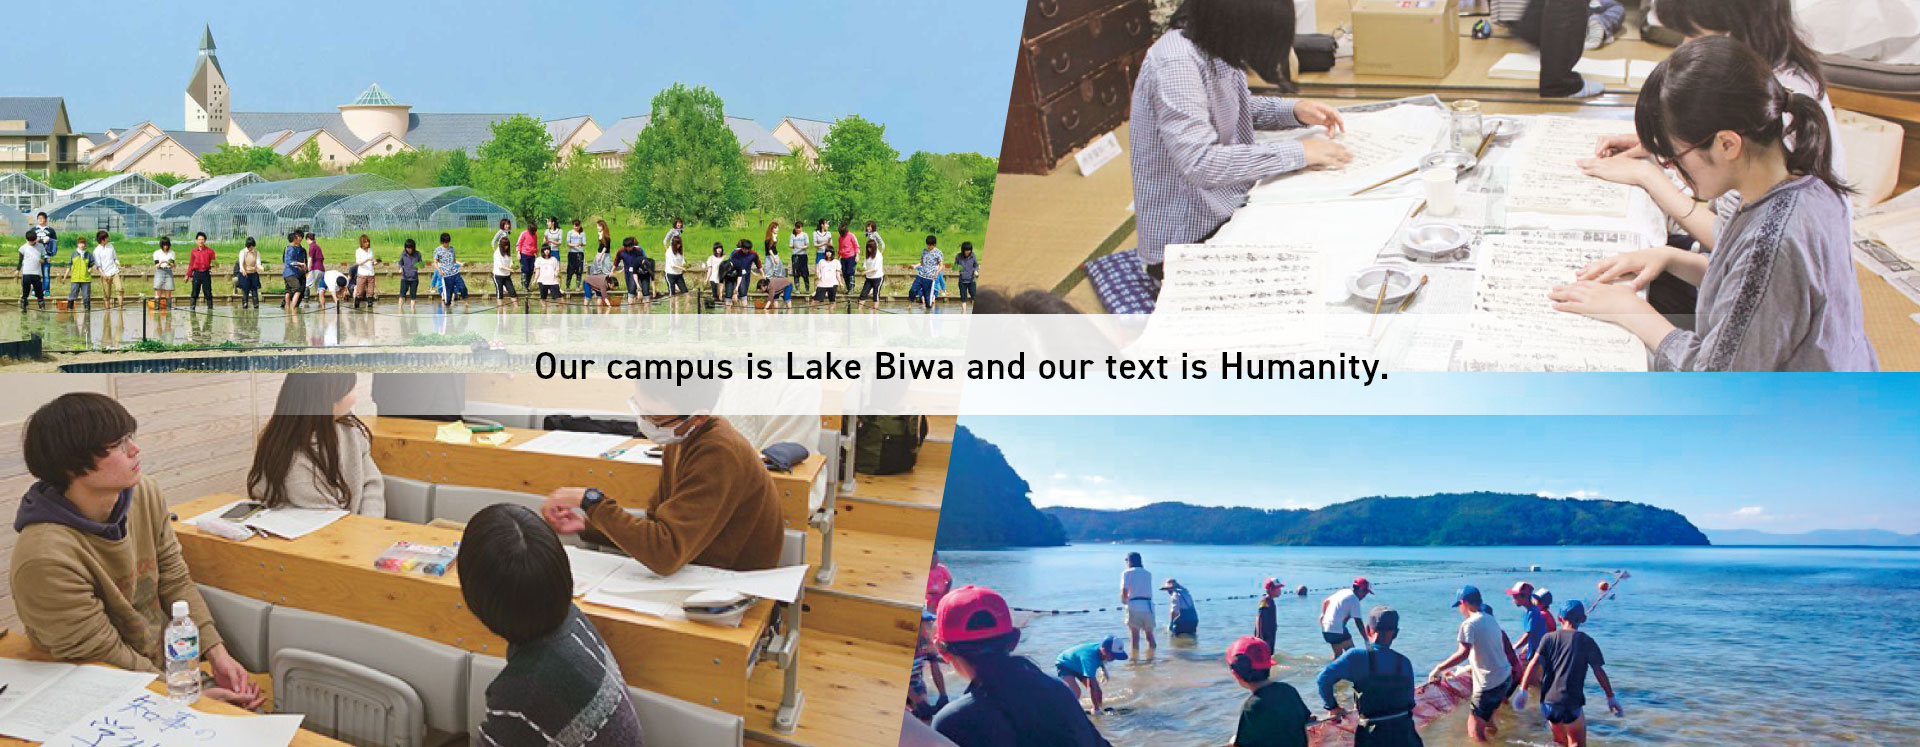 Our campus is Lake Biwa and our text is Humanity.